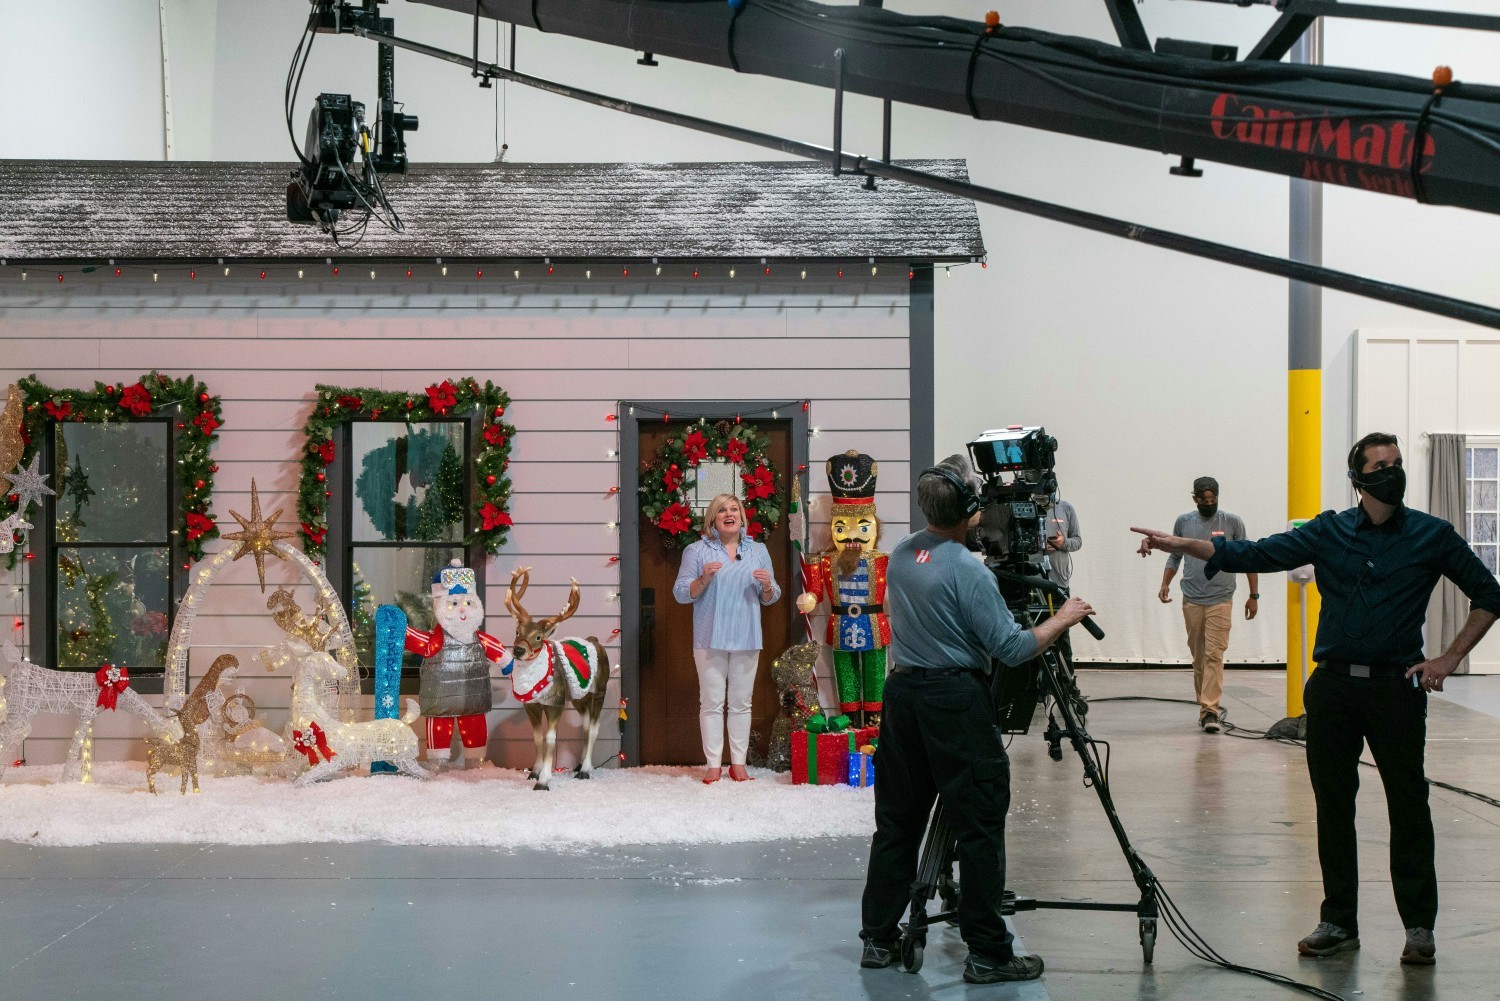 Christmas (filming) in July! Capturing the spirit of the season, one, well directed, frame at a time!